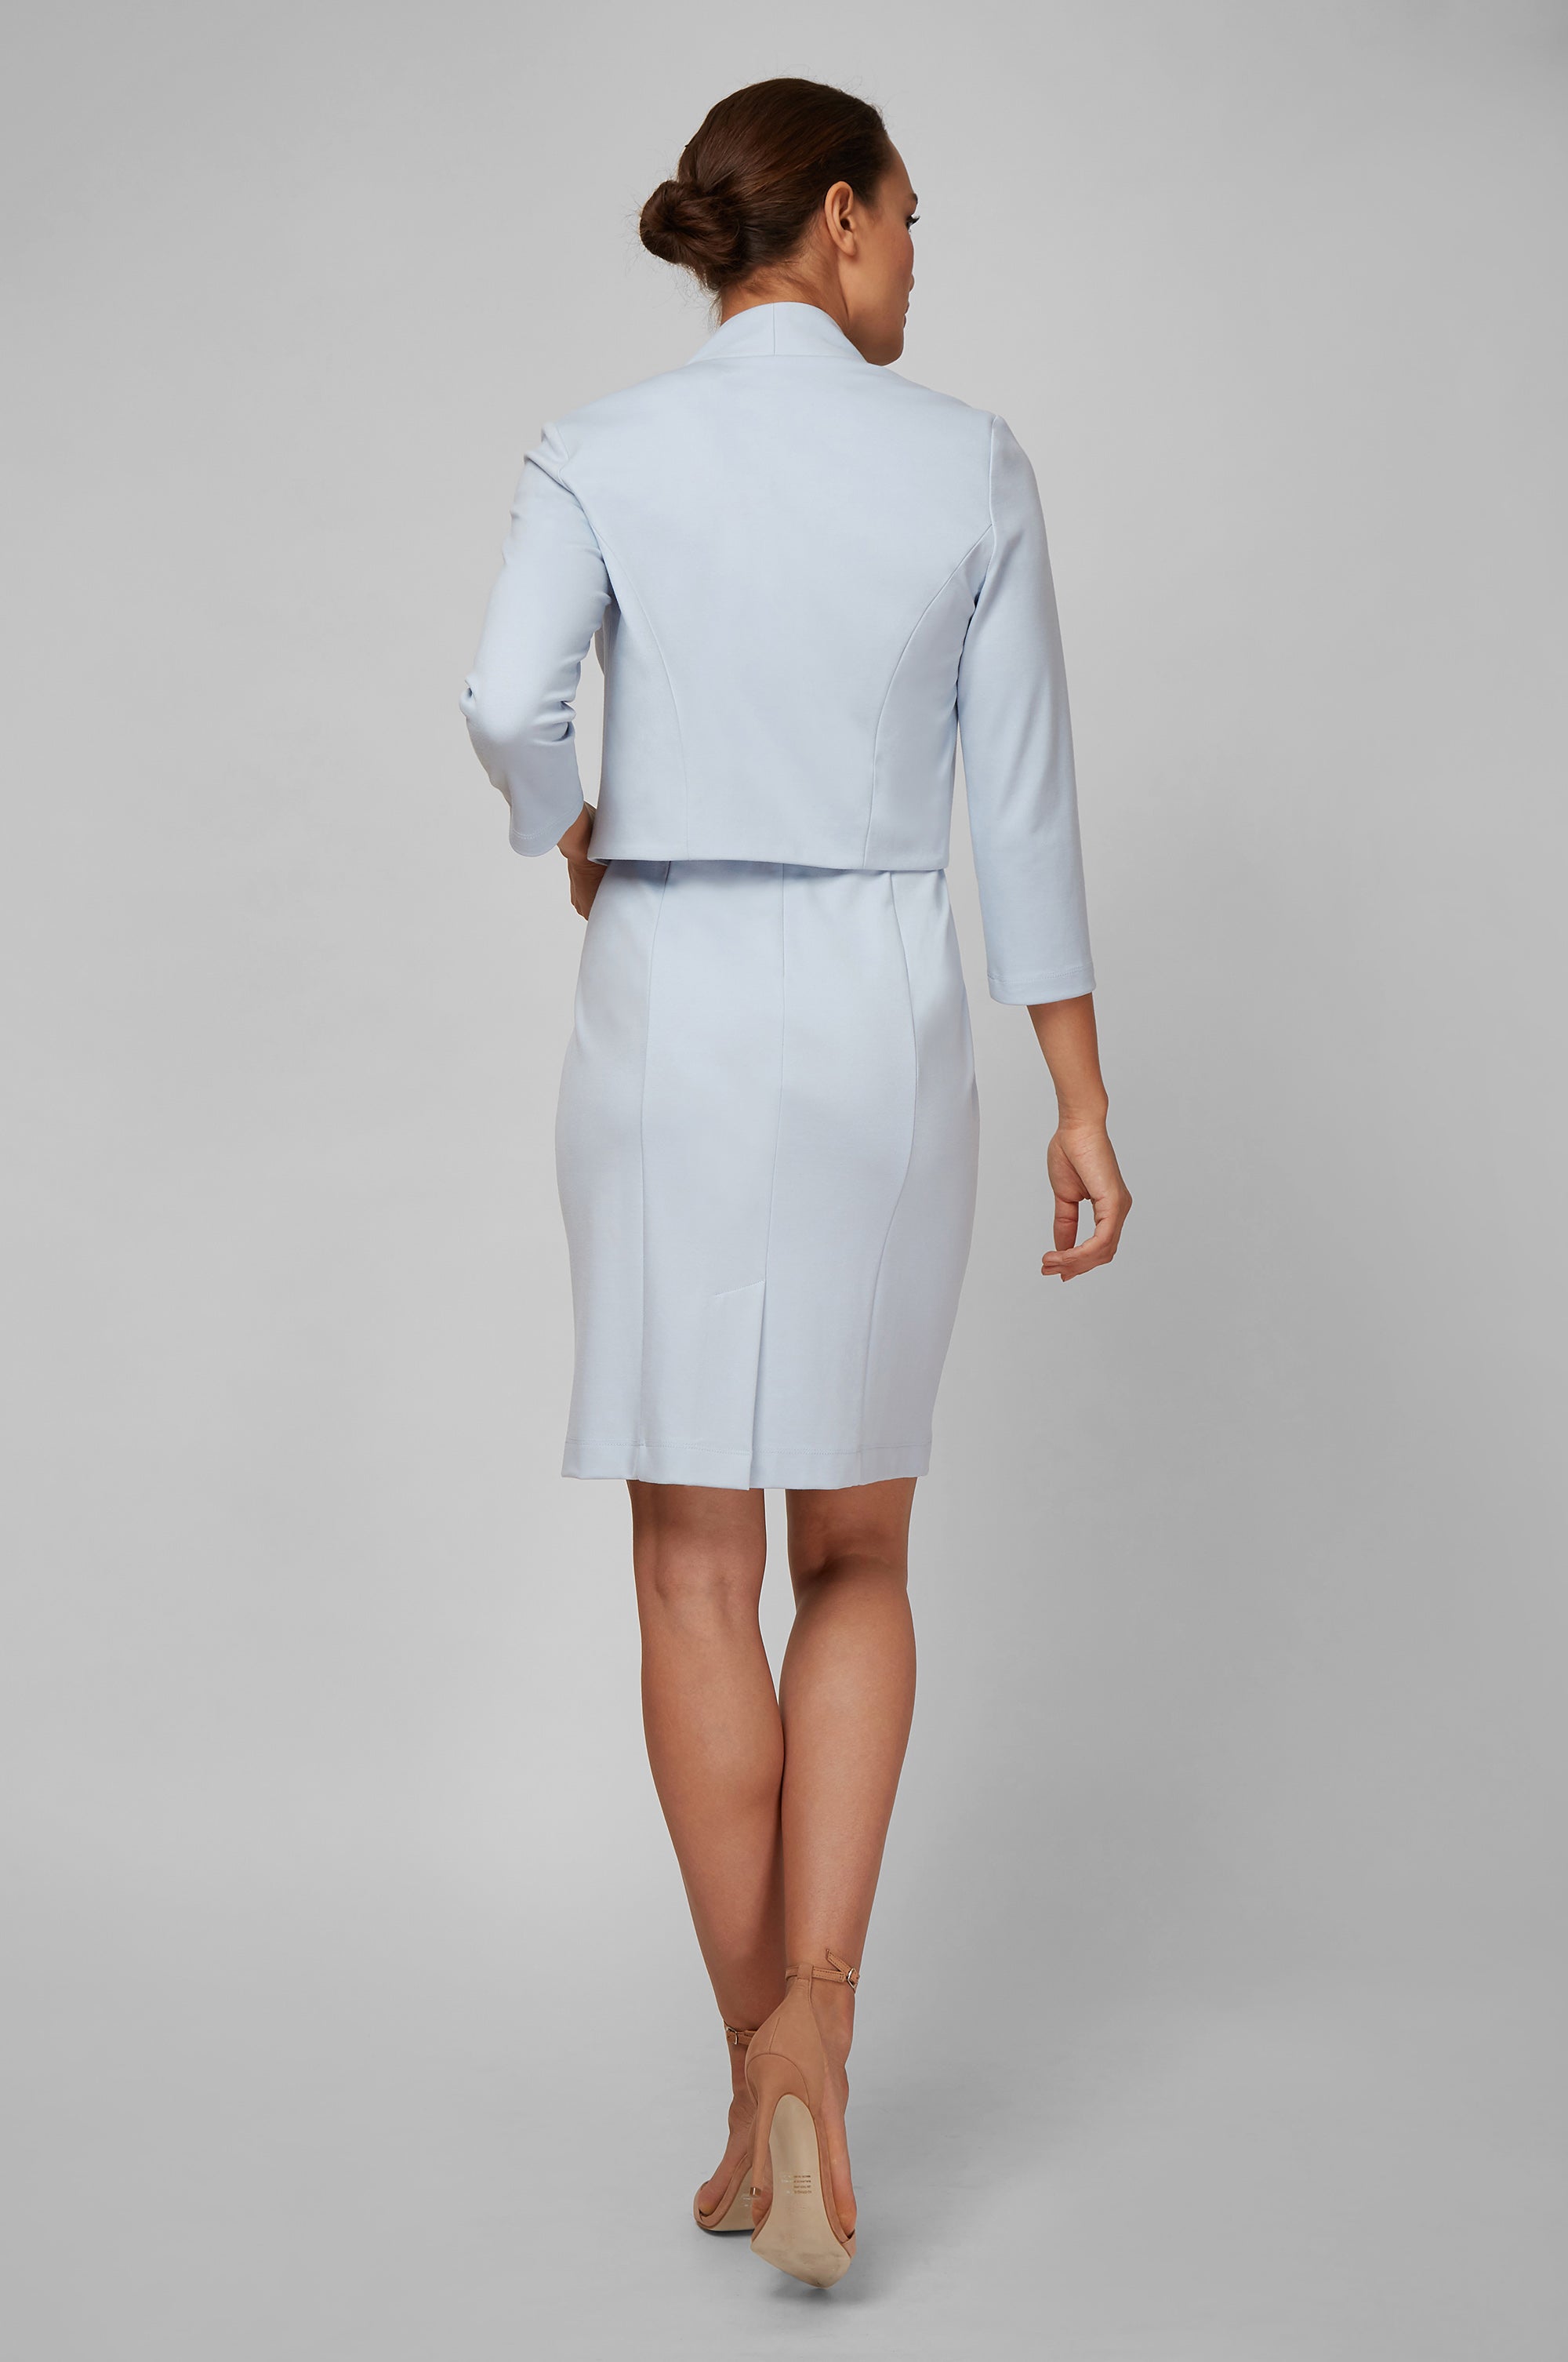 Mila Jacket - Baby Blue Professional Dress For Young Adults | Nora Gardner